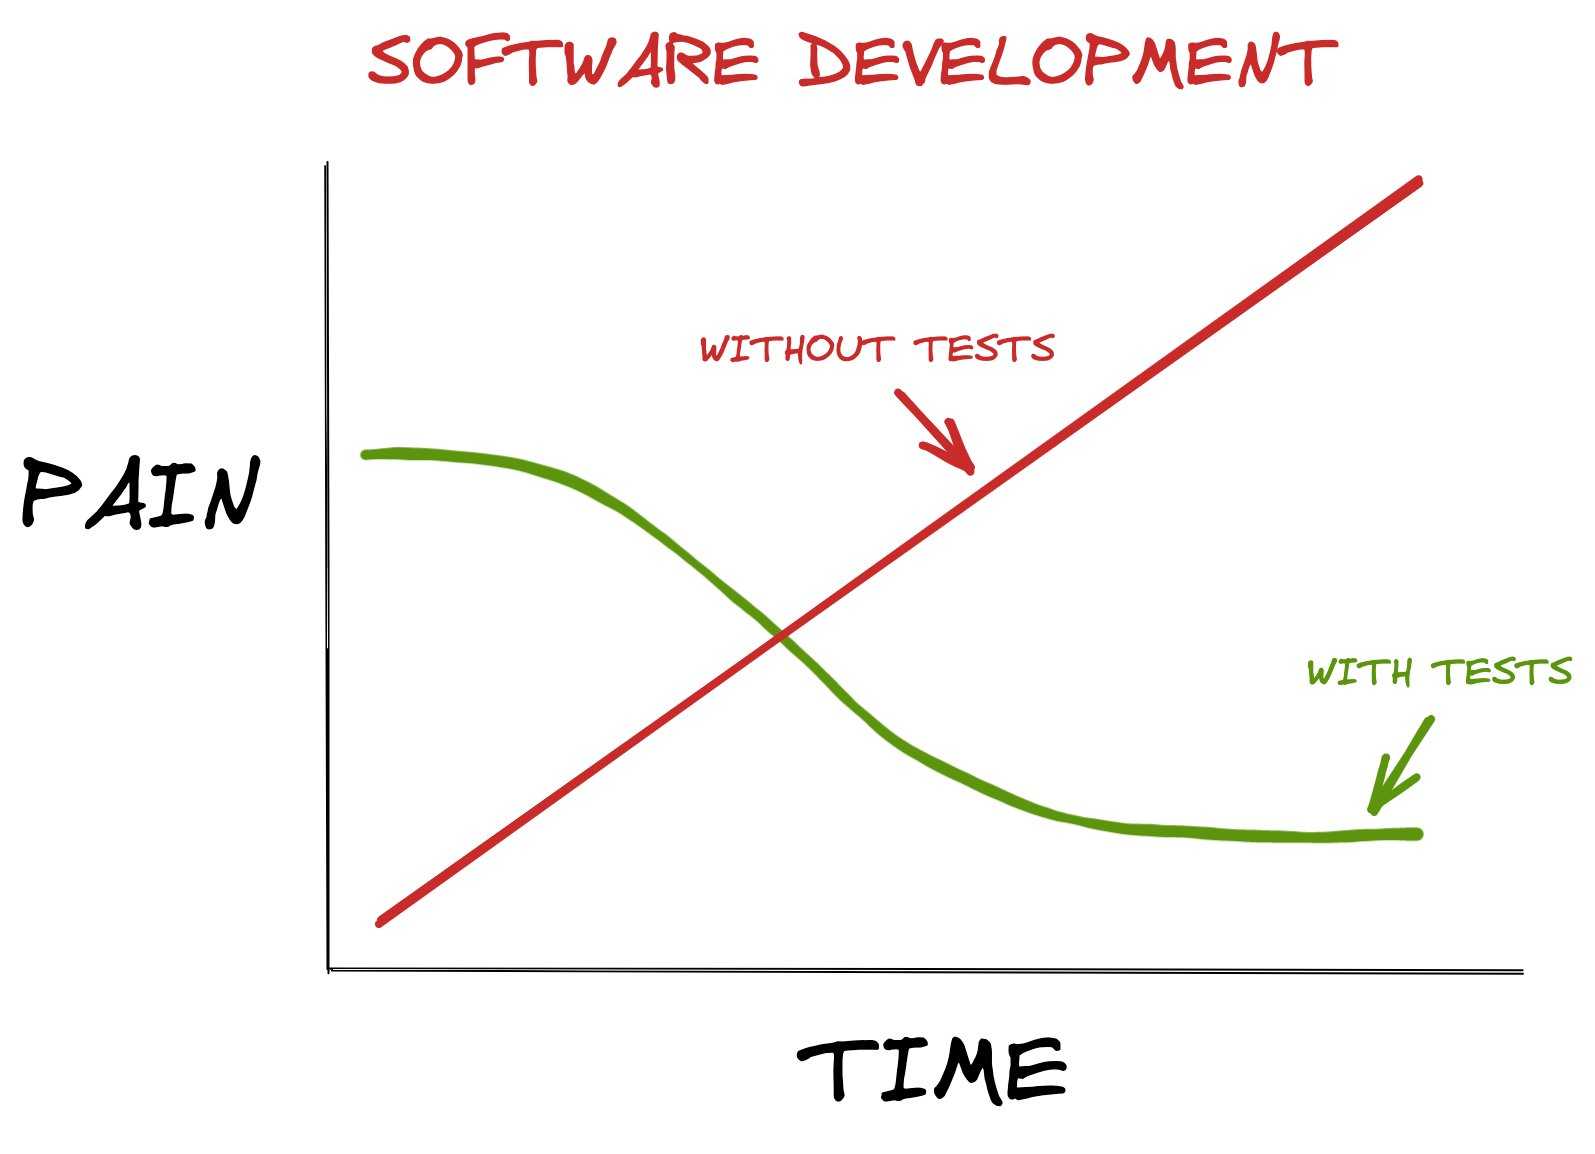 Software development over time